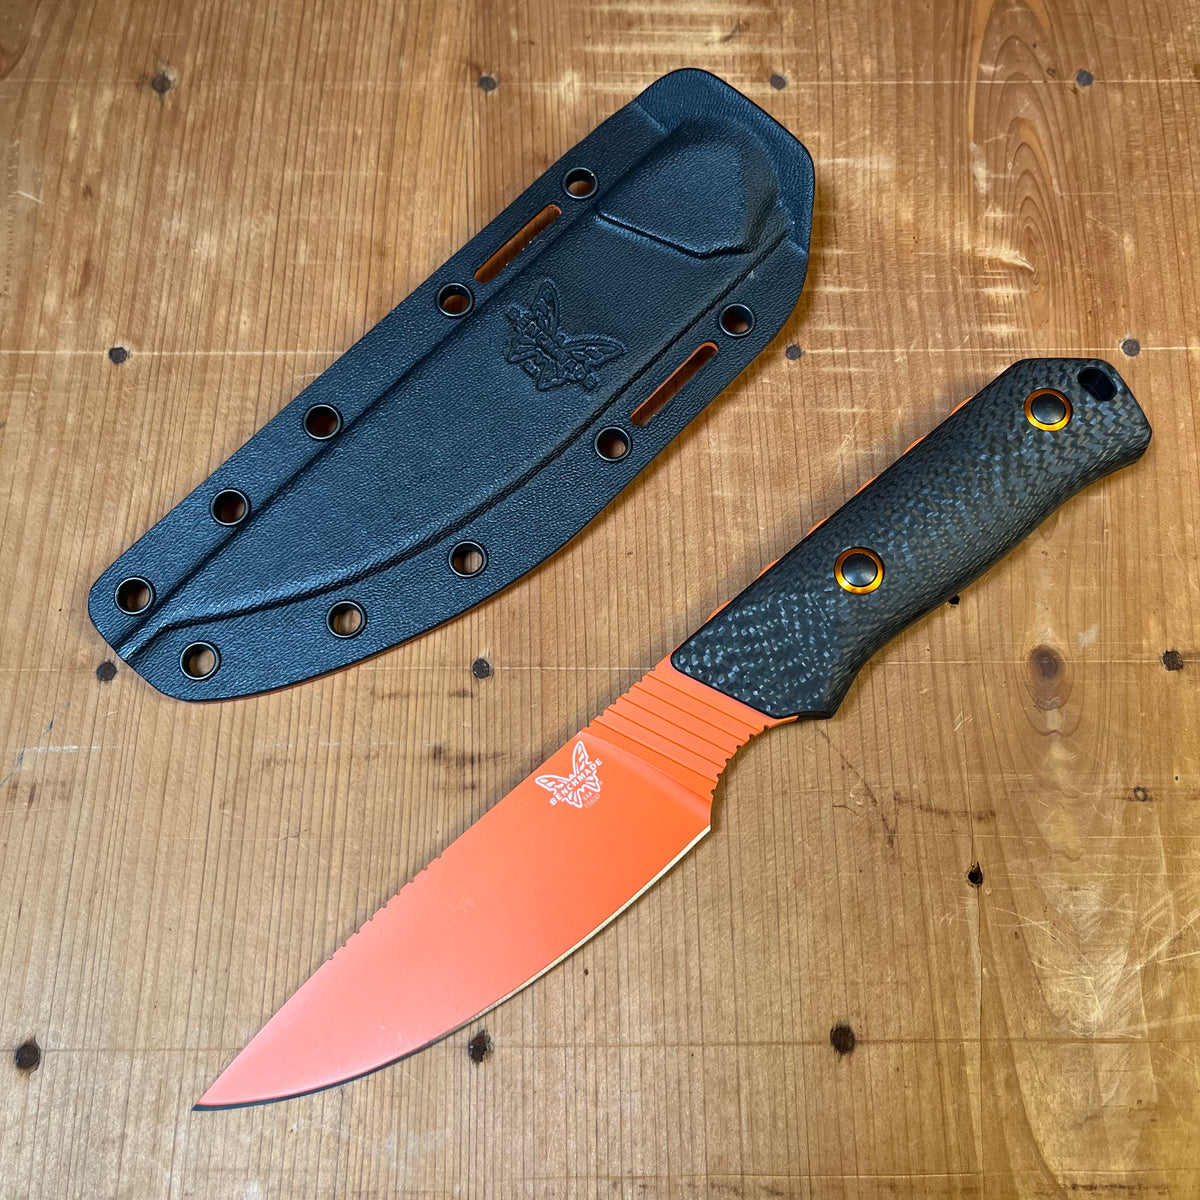 Benchmade 15600OR Raghorn with Sheath